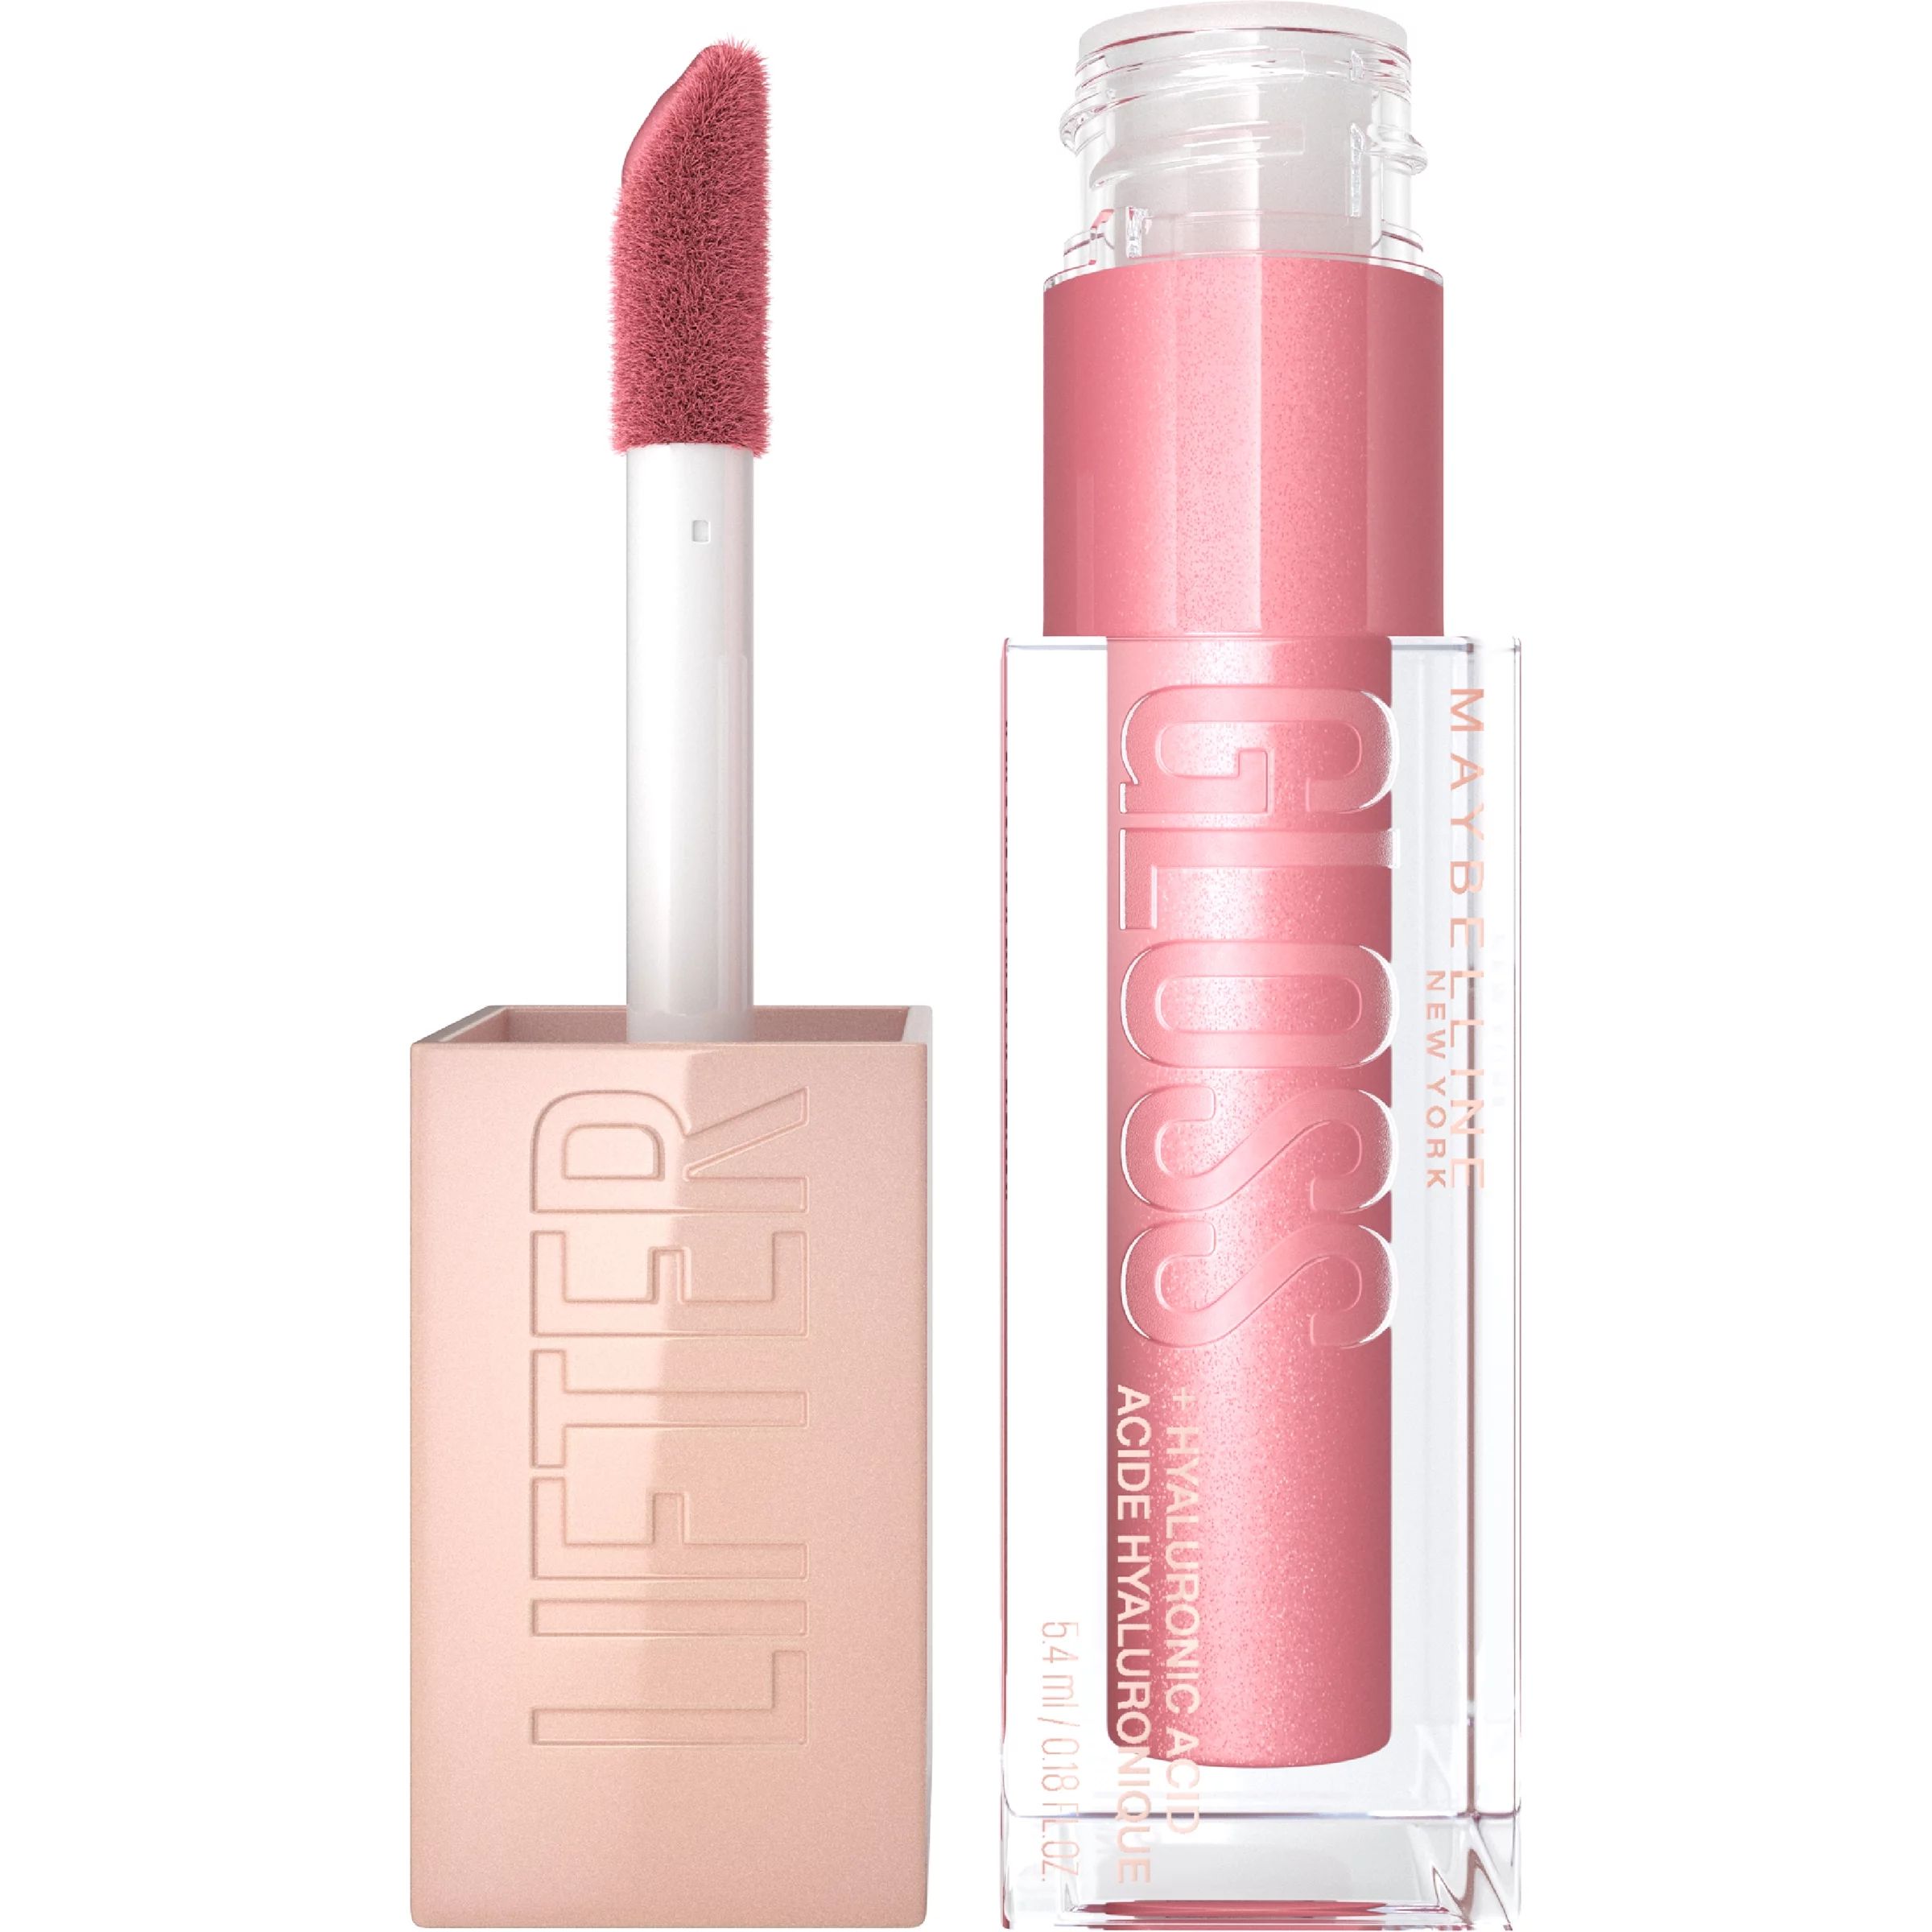 Maybelline Lifter Gloss Lip Gloss Makeup with Hyaluronic Acid, Brass | Walmart (US)